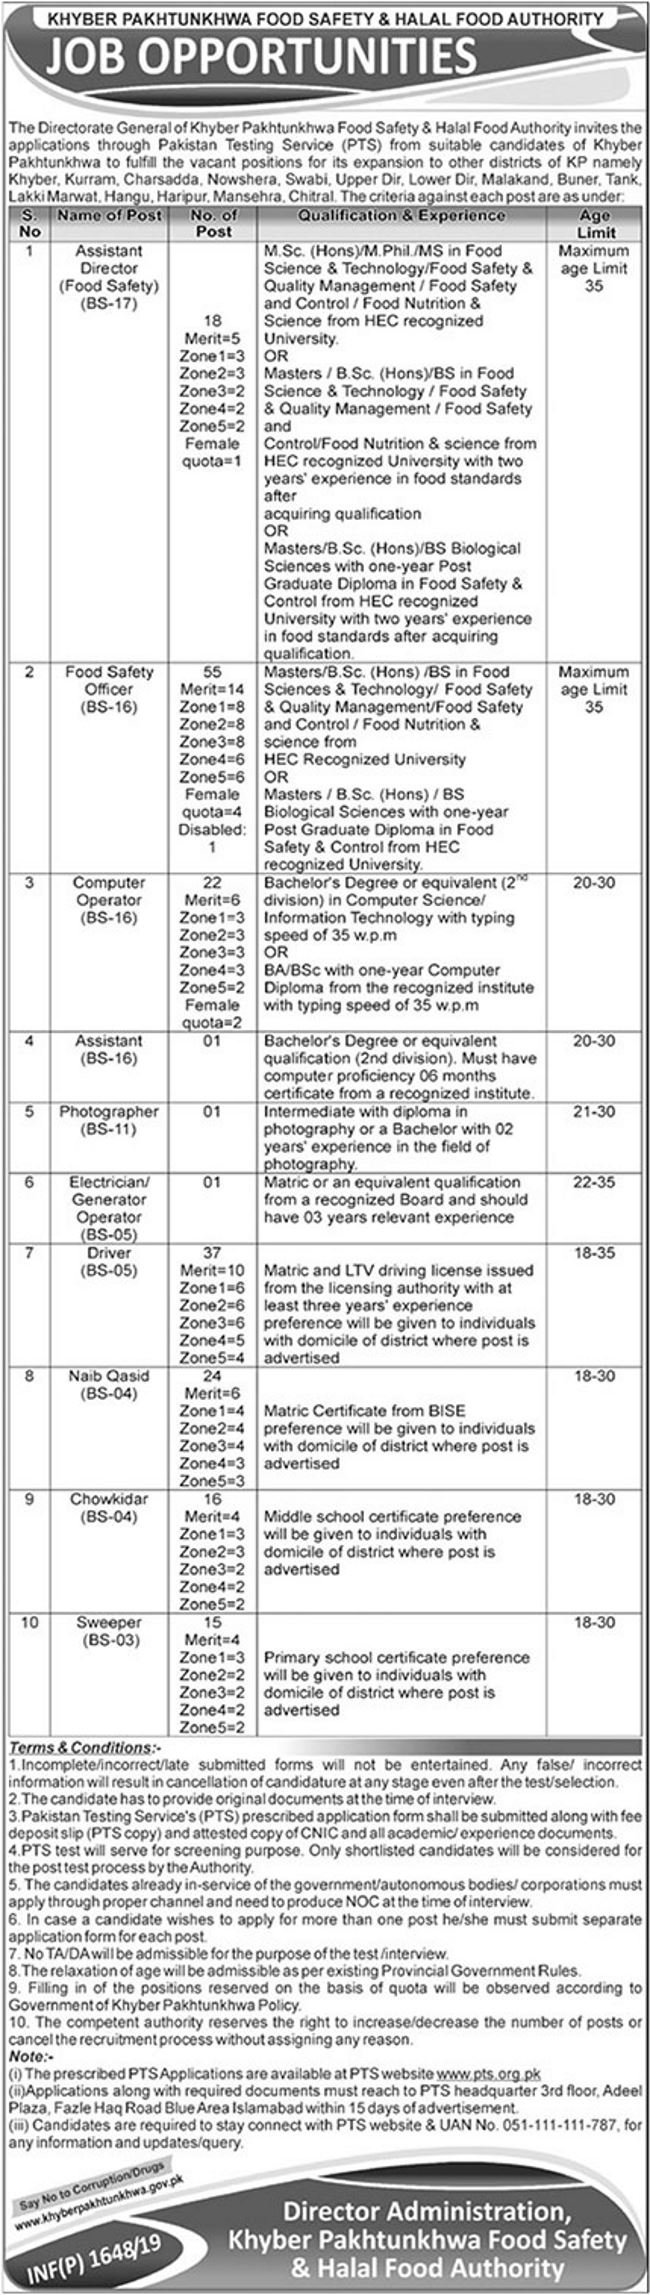 Food Safety & Halal Food Authority KP Jobs 2019 for 190+ Food Safety Officers, Computer Orators and Other Posts (Download PTS Form)